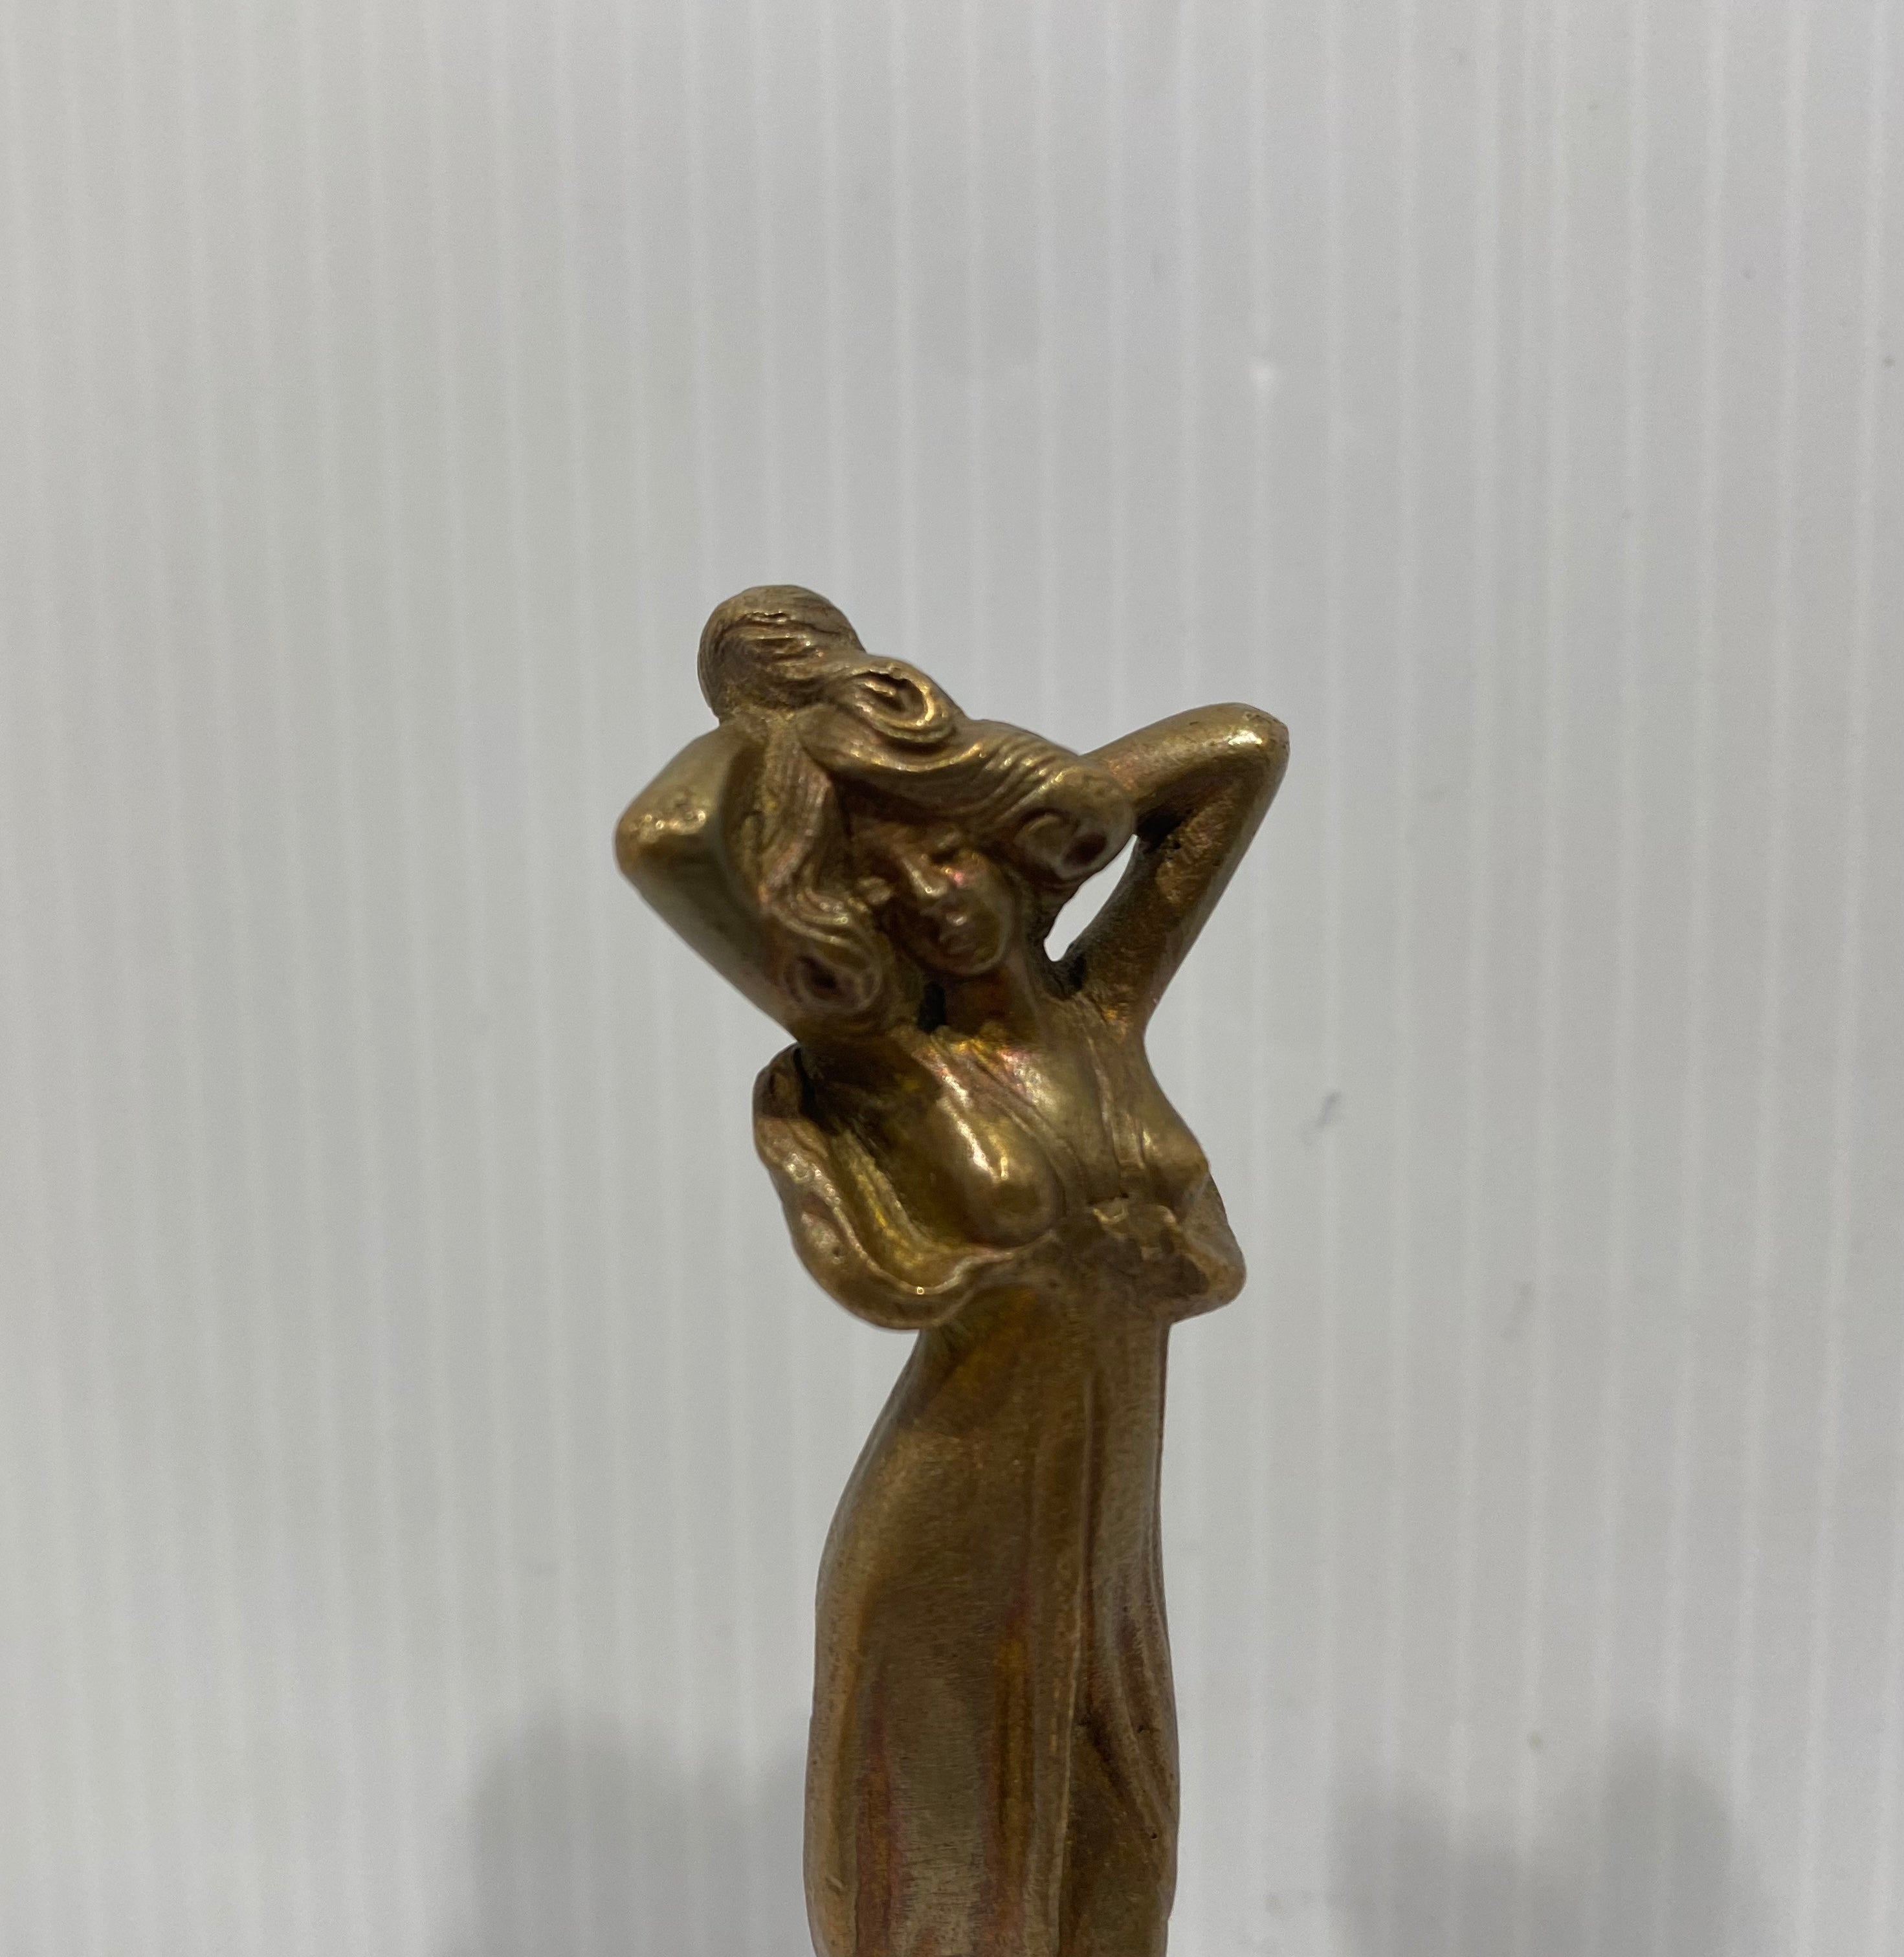 A lovely Art Nouveau bronze wax seal stamp of a woman figure, with long hair standing in a gown atop a beveled round base.